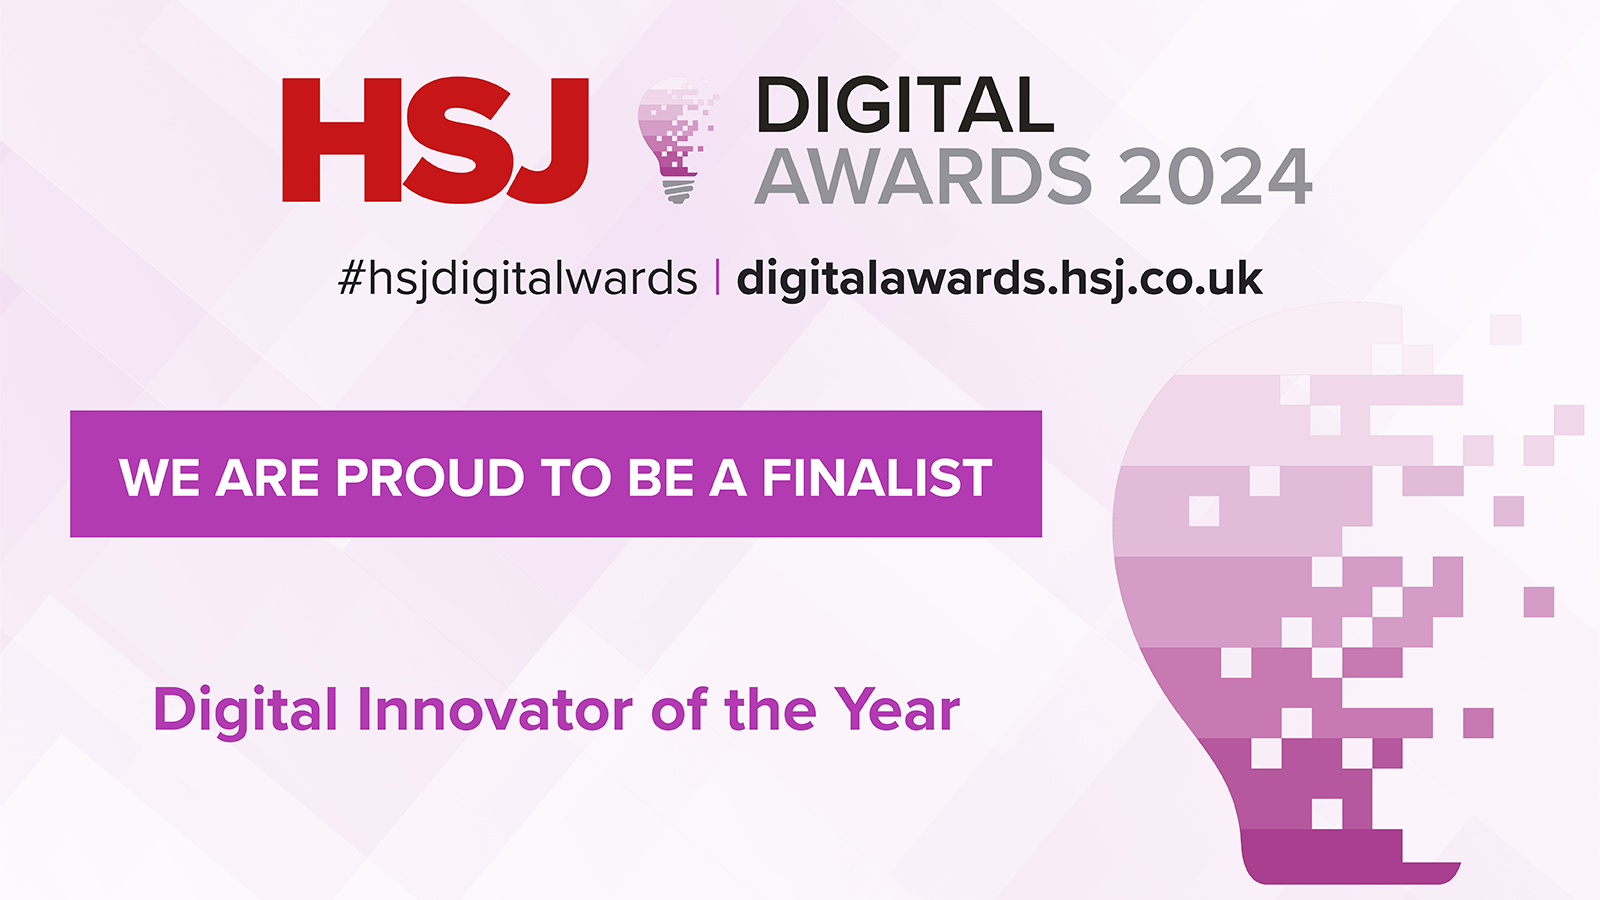 Rotherham NHS Foundation Trust and Netcall shortlisted for the 2024 HSJ Digital Awards